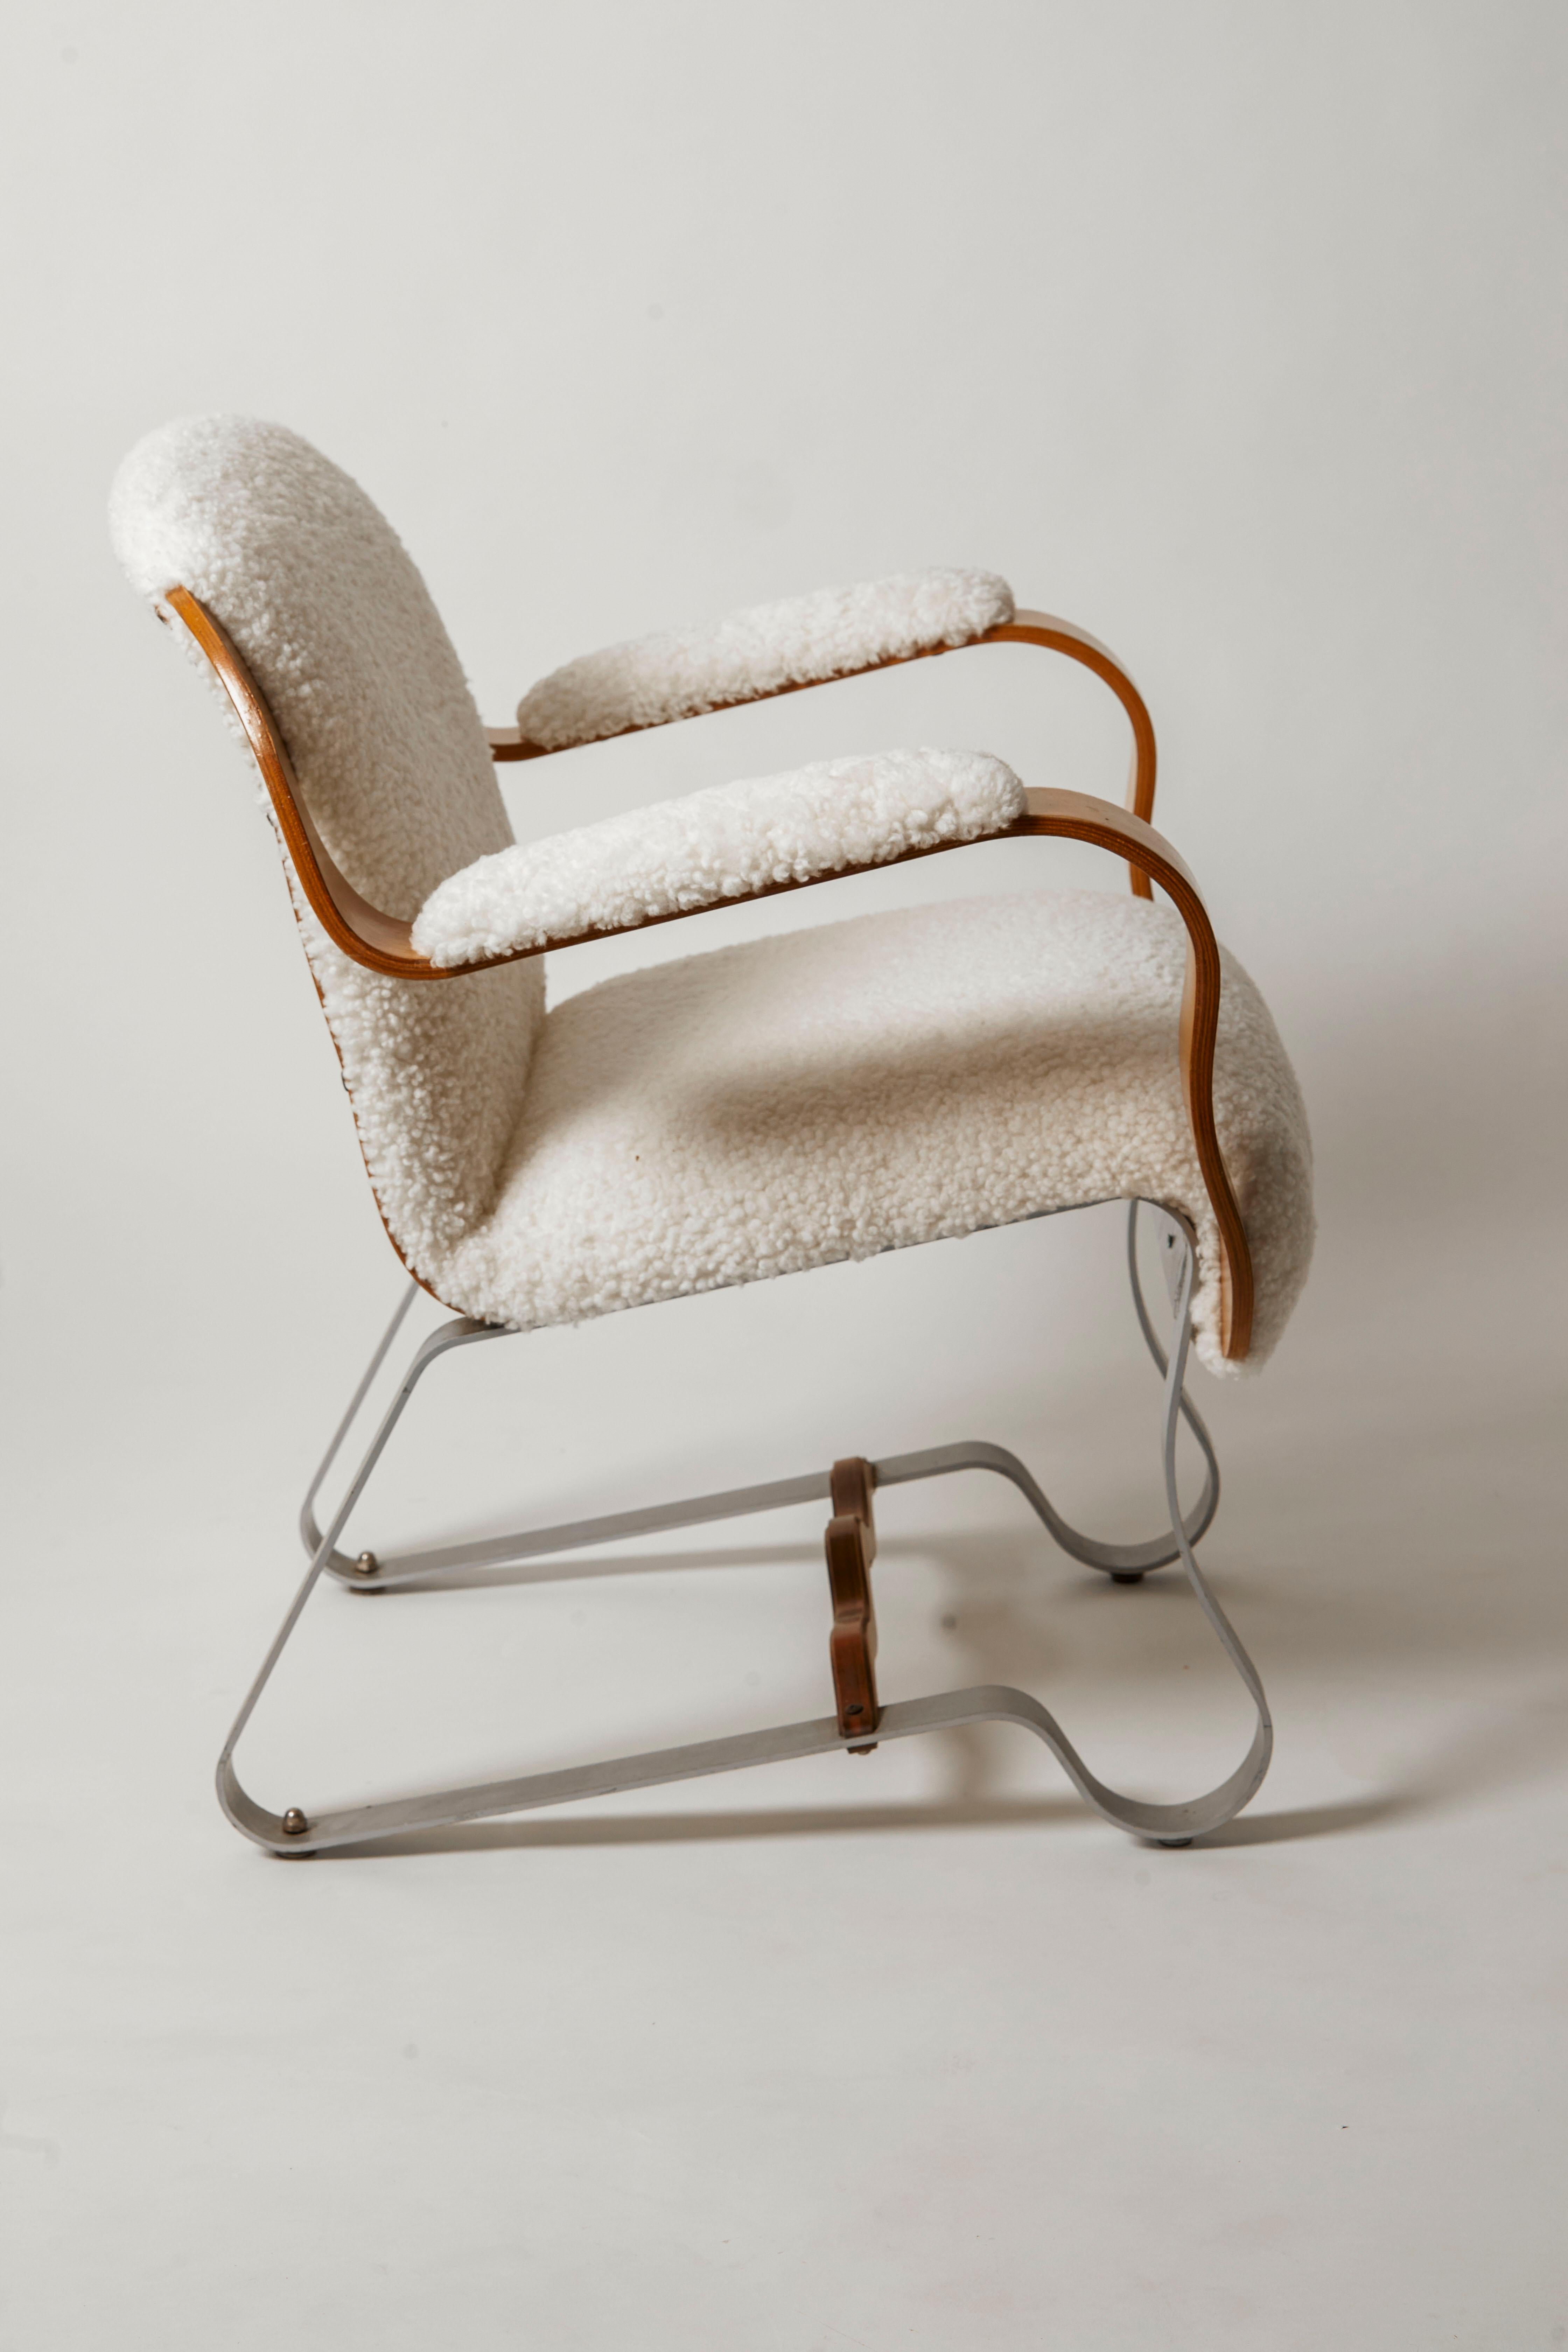 Italian 1970's Italy Vintage Poltrona Frau Arm Chair in Shearling For Sale